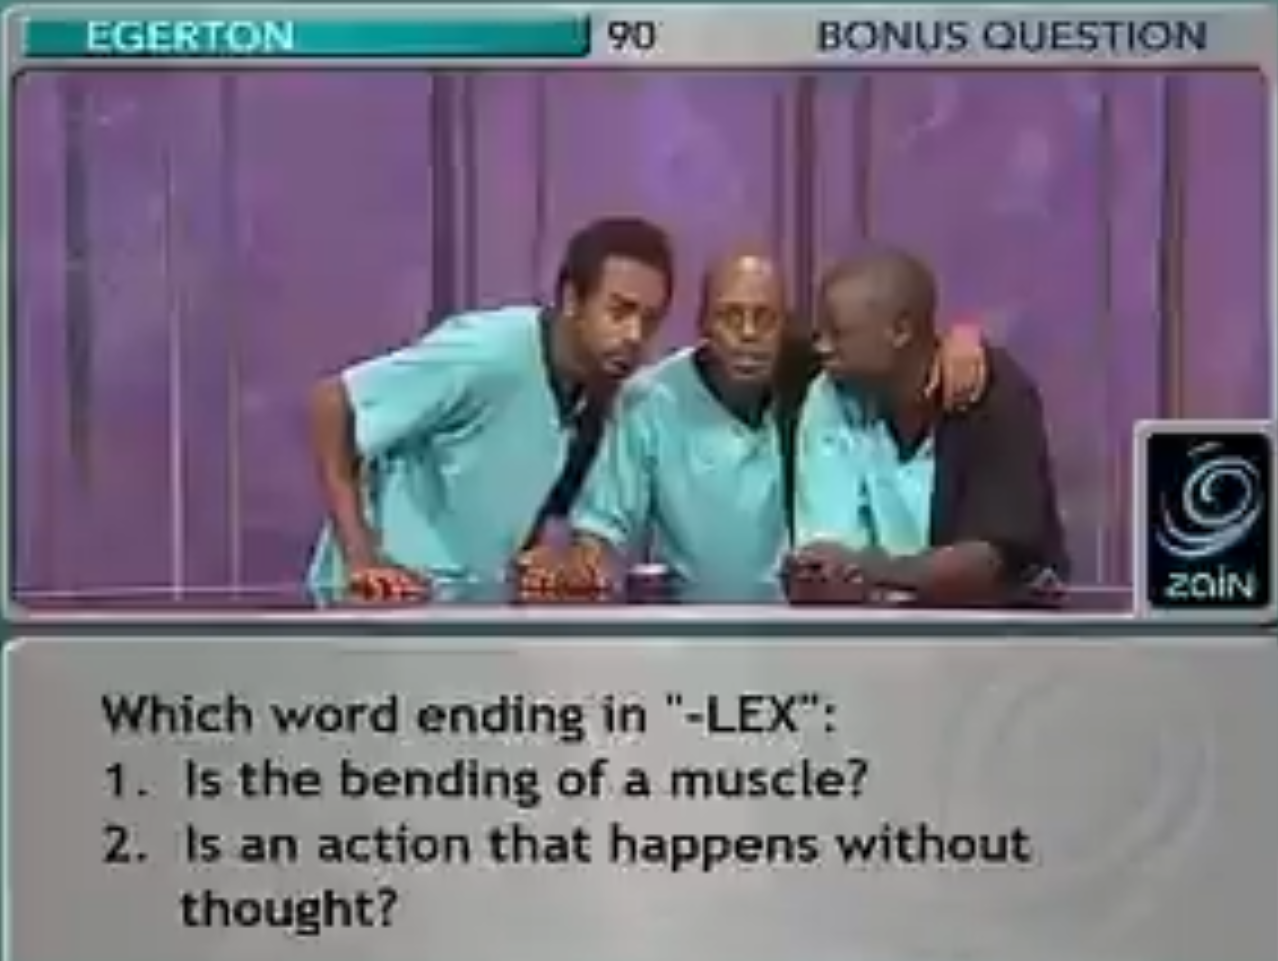 Can you answer the first question?